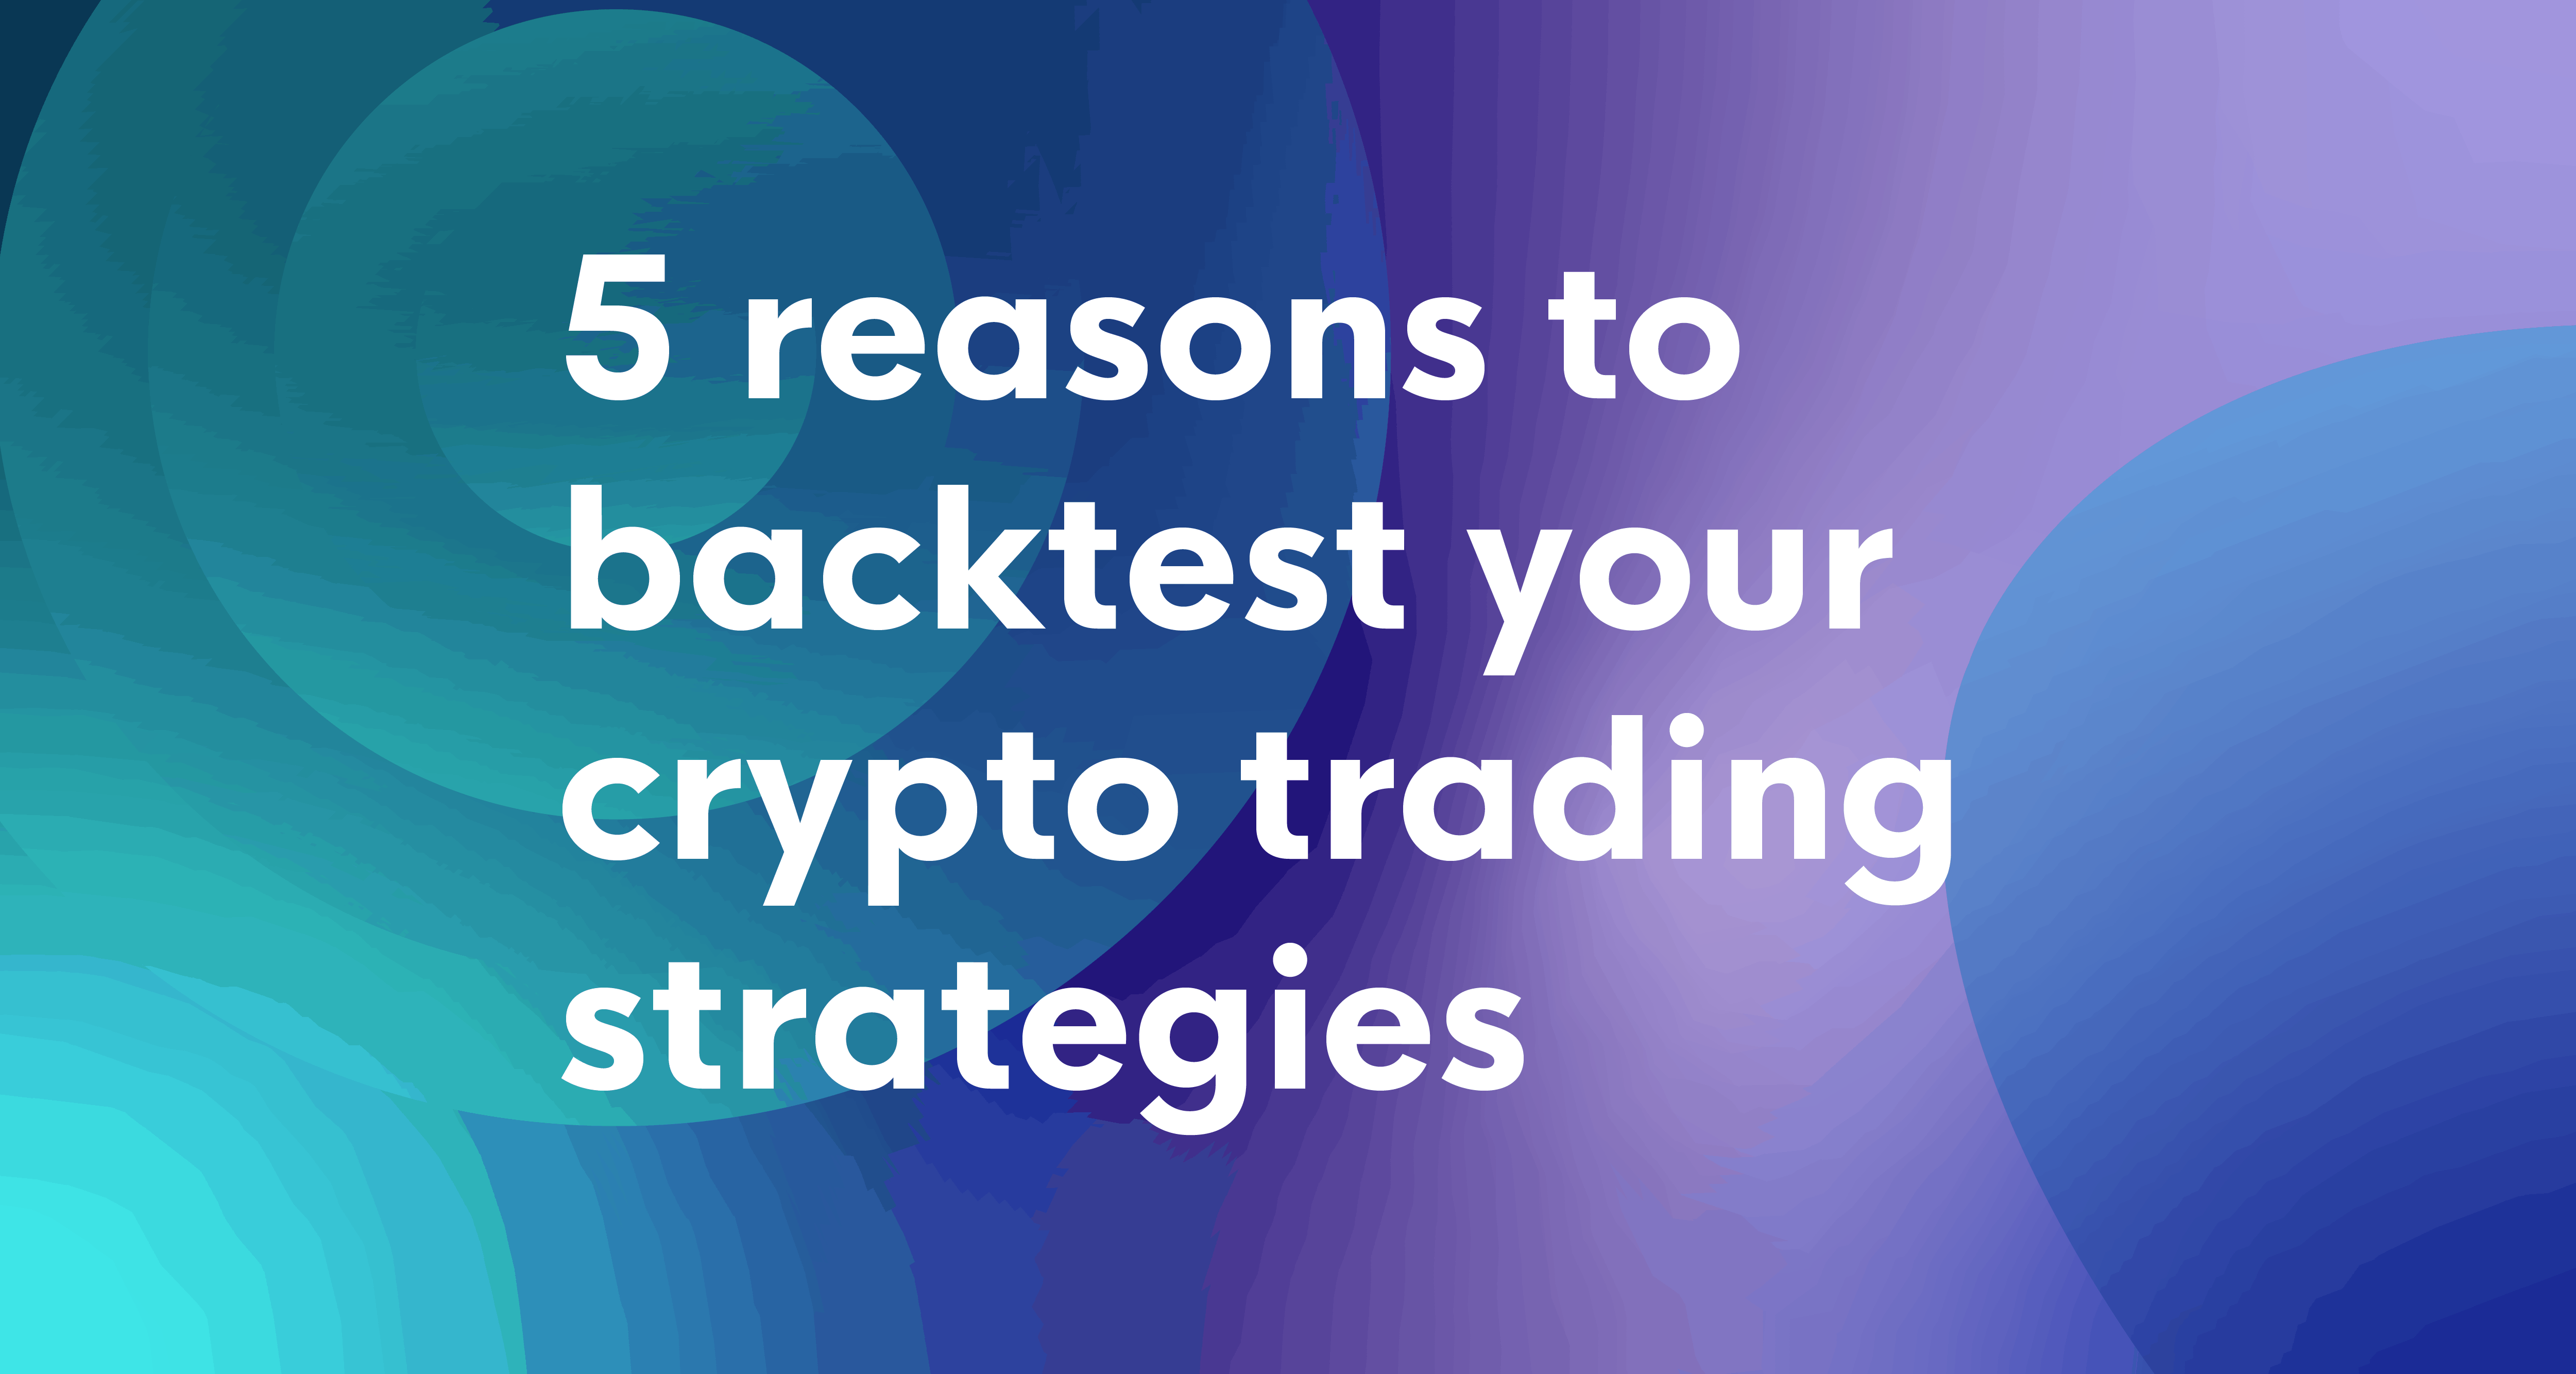 5 reasons to backtest your crypto trading strategies